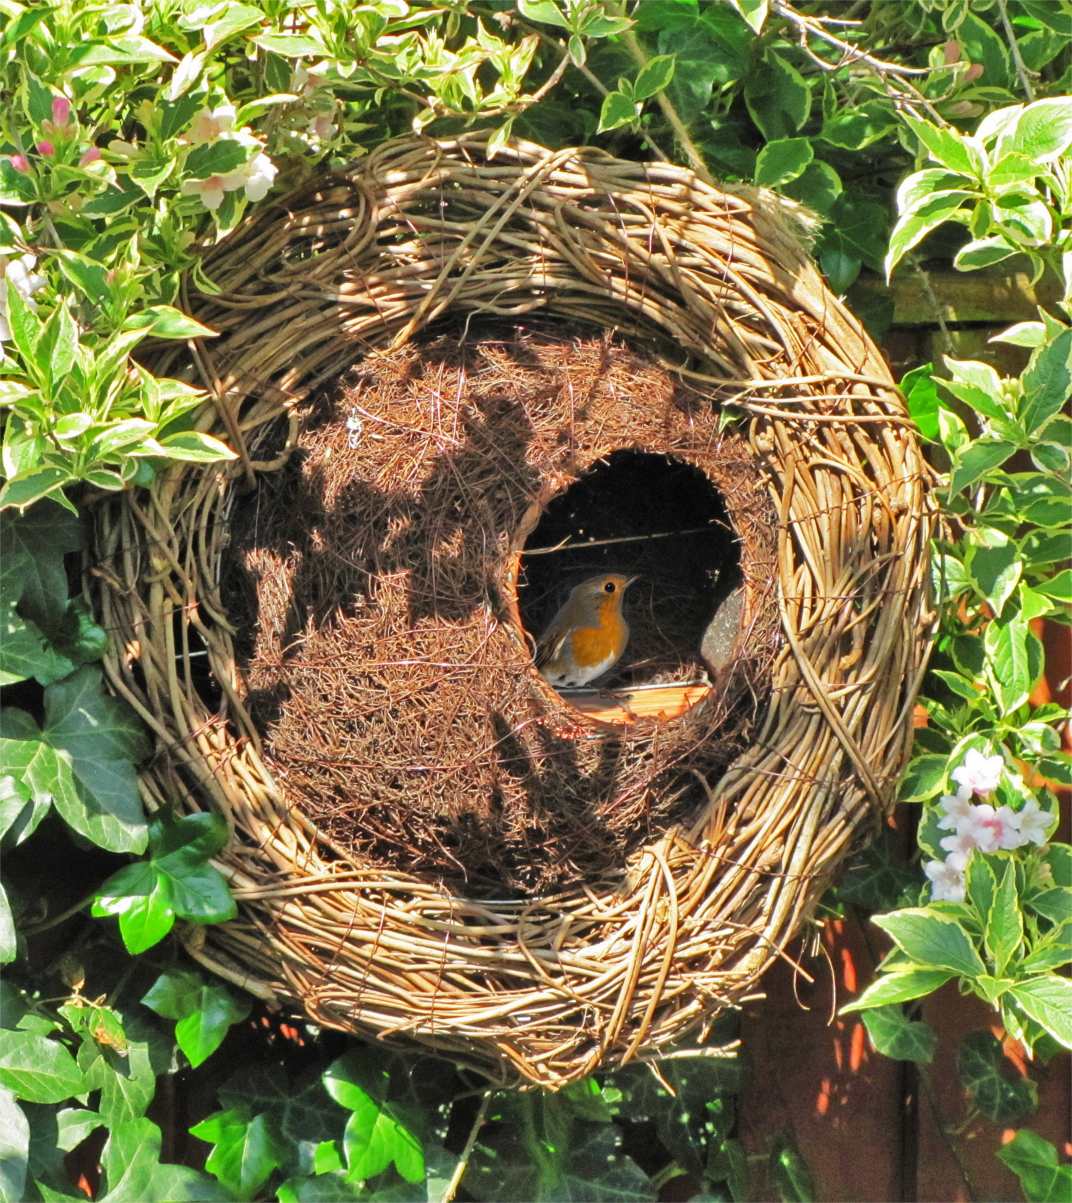 round brush wood wreath base wrapped around a ball shaped concealed bird nester, hung amongst folliage with robin redbreast sheltering inside.